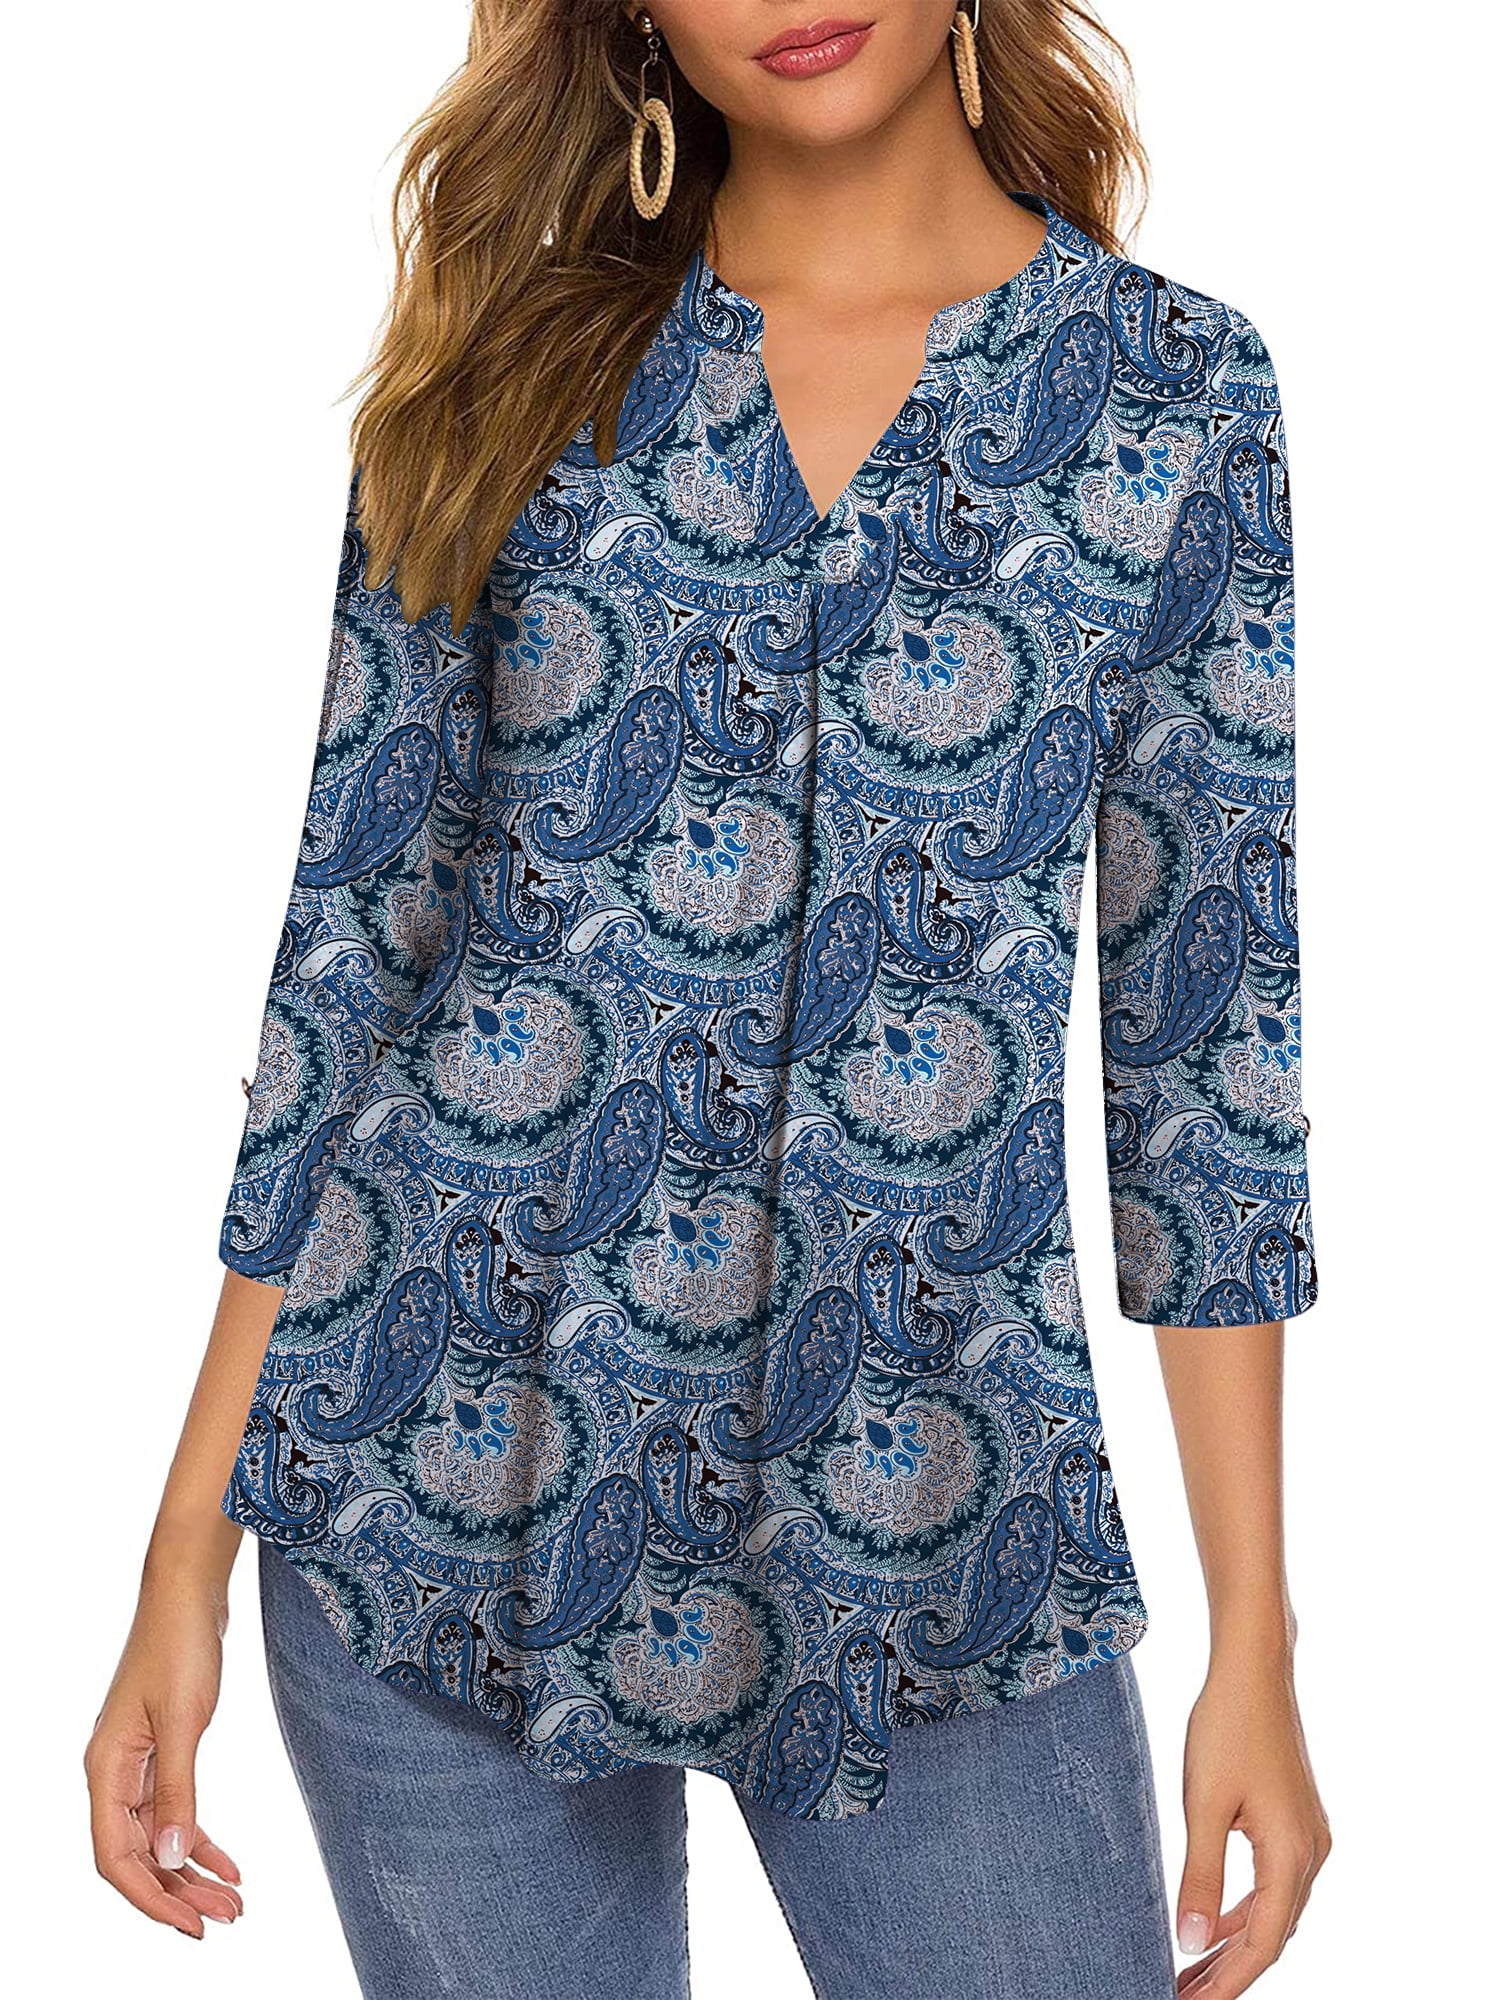 Chama 3/4 Sleeves V Neck Tunic Tops for Women Paisley Printed Folwy ...